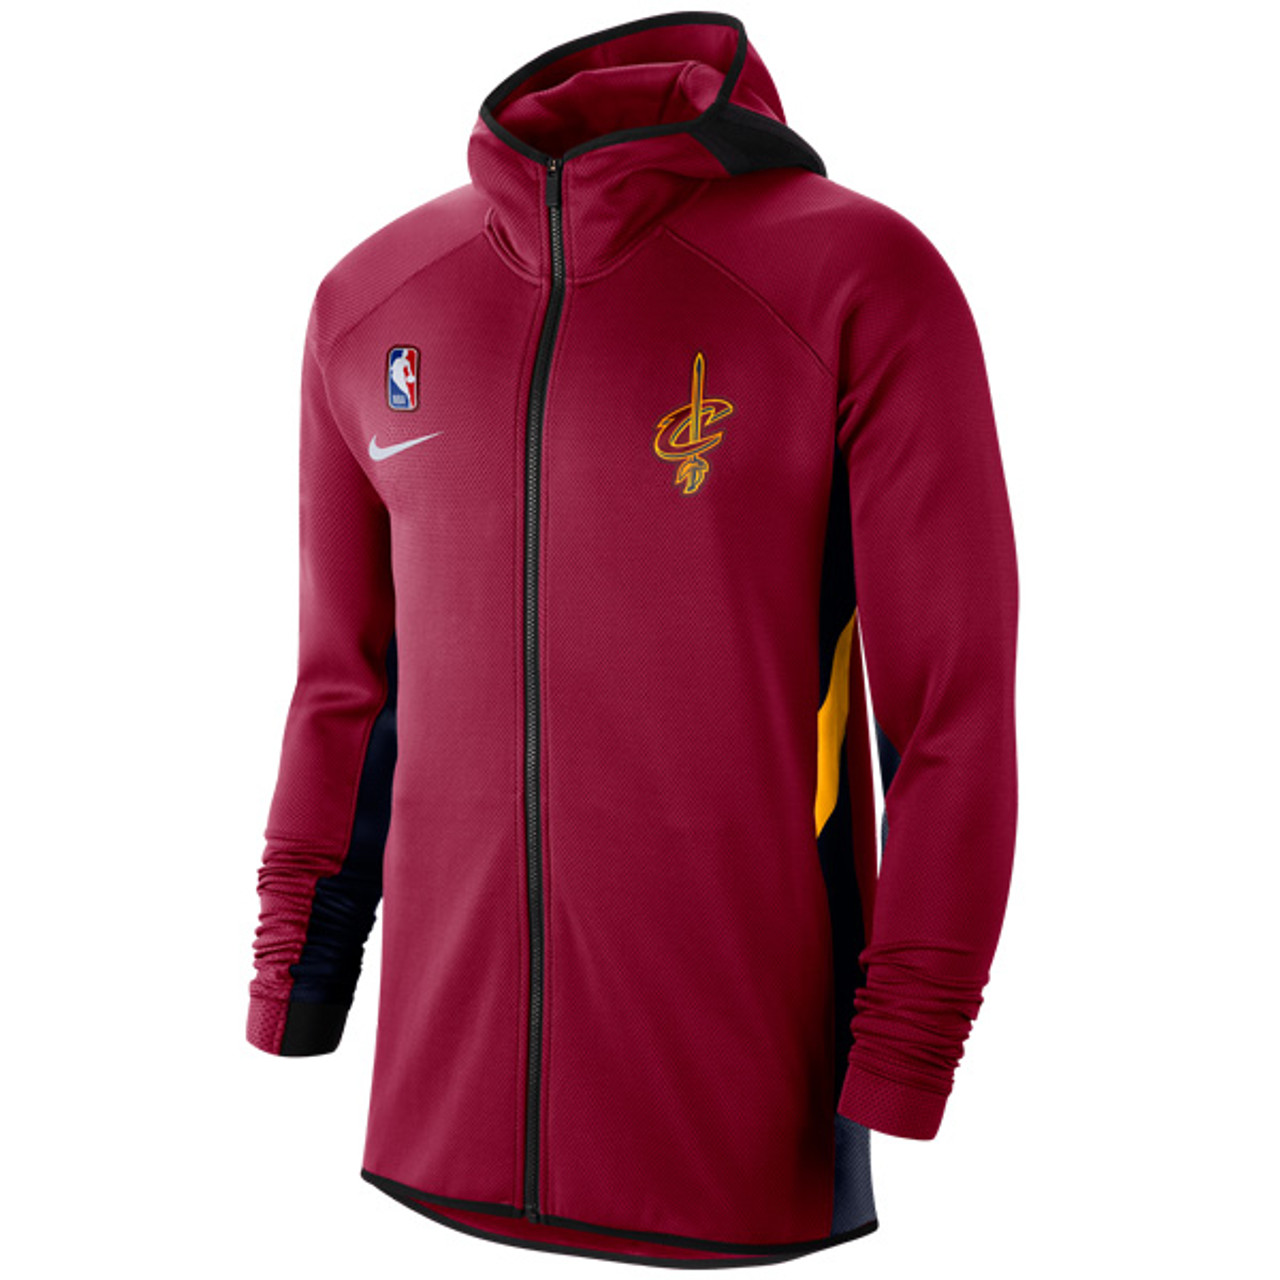 [WINE] Nike ThermaFlex Showtime Hoodie | Cleveland Cavaliers